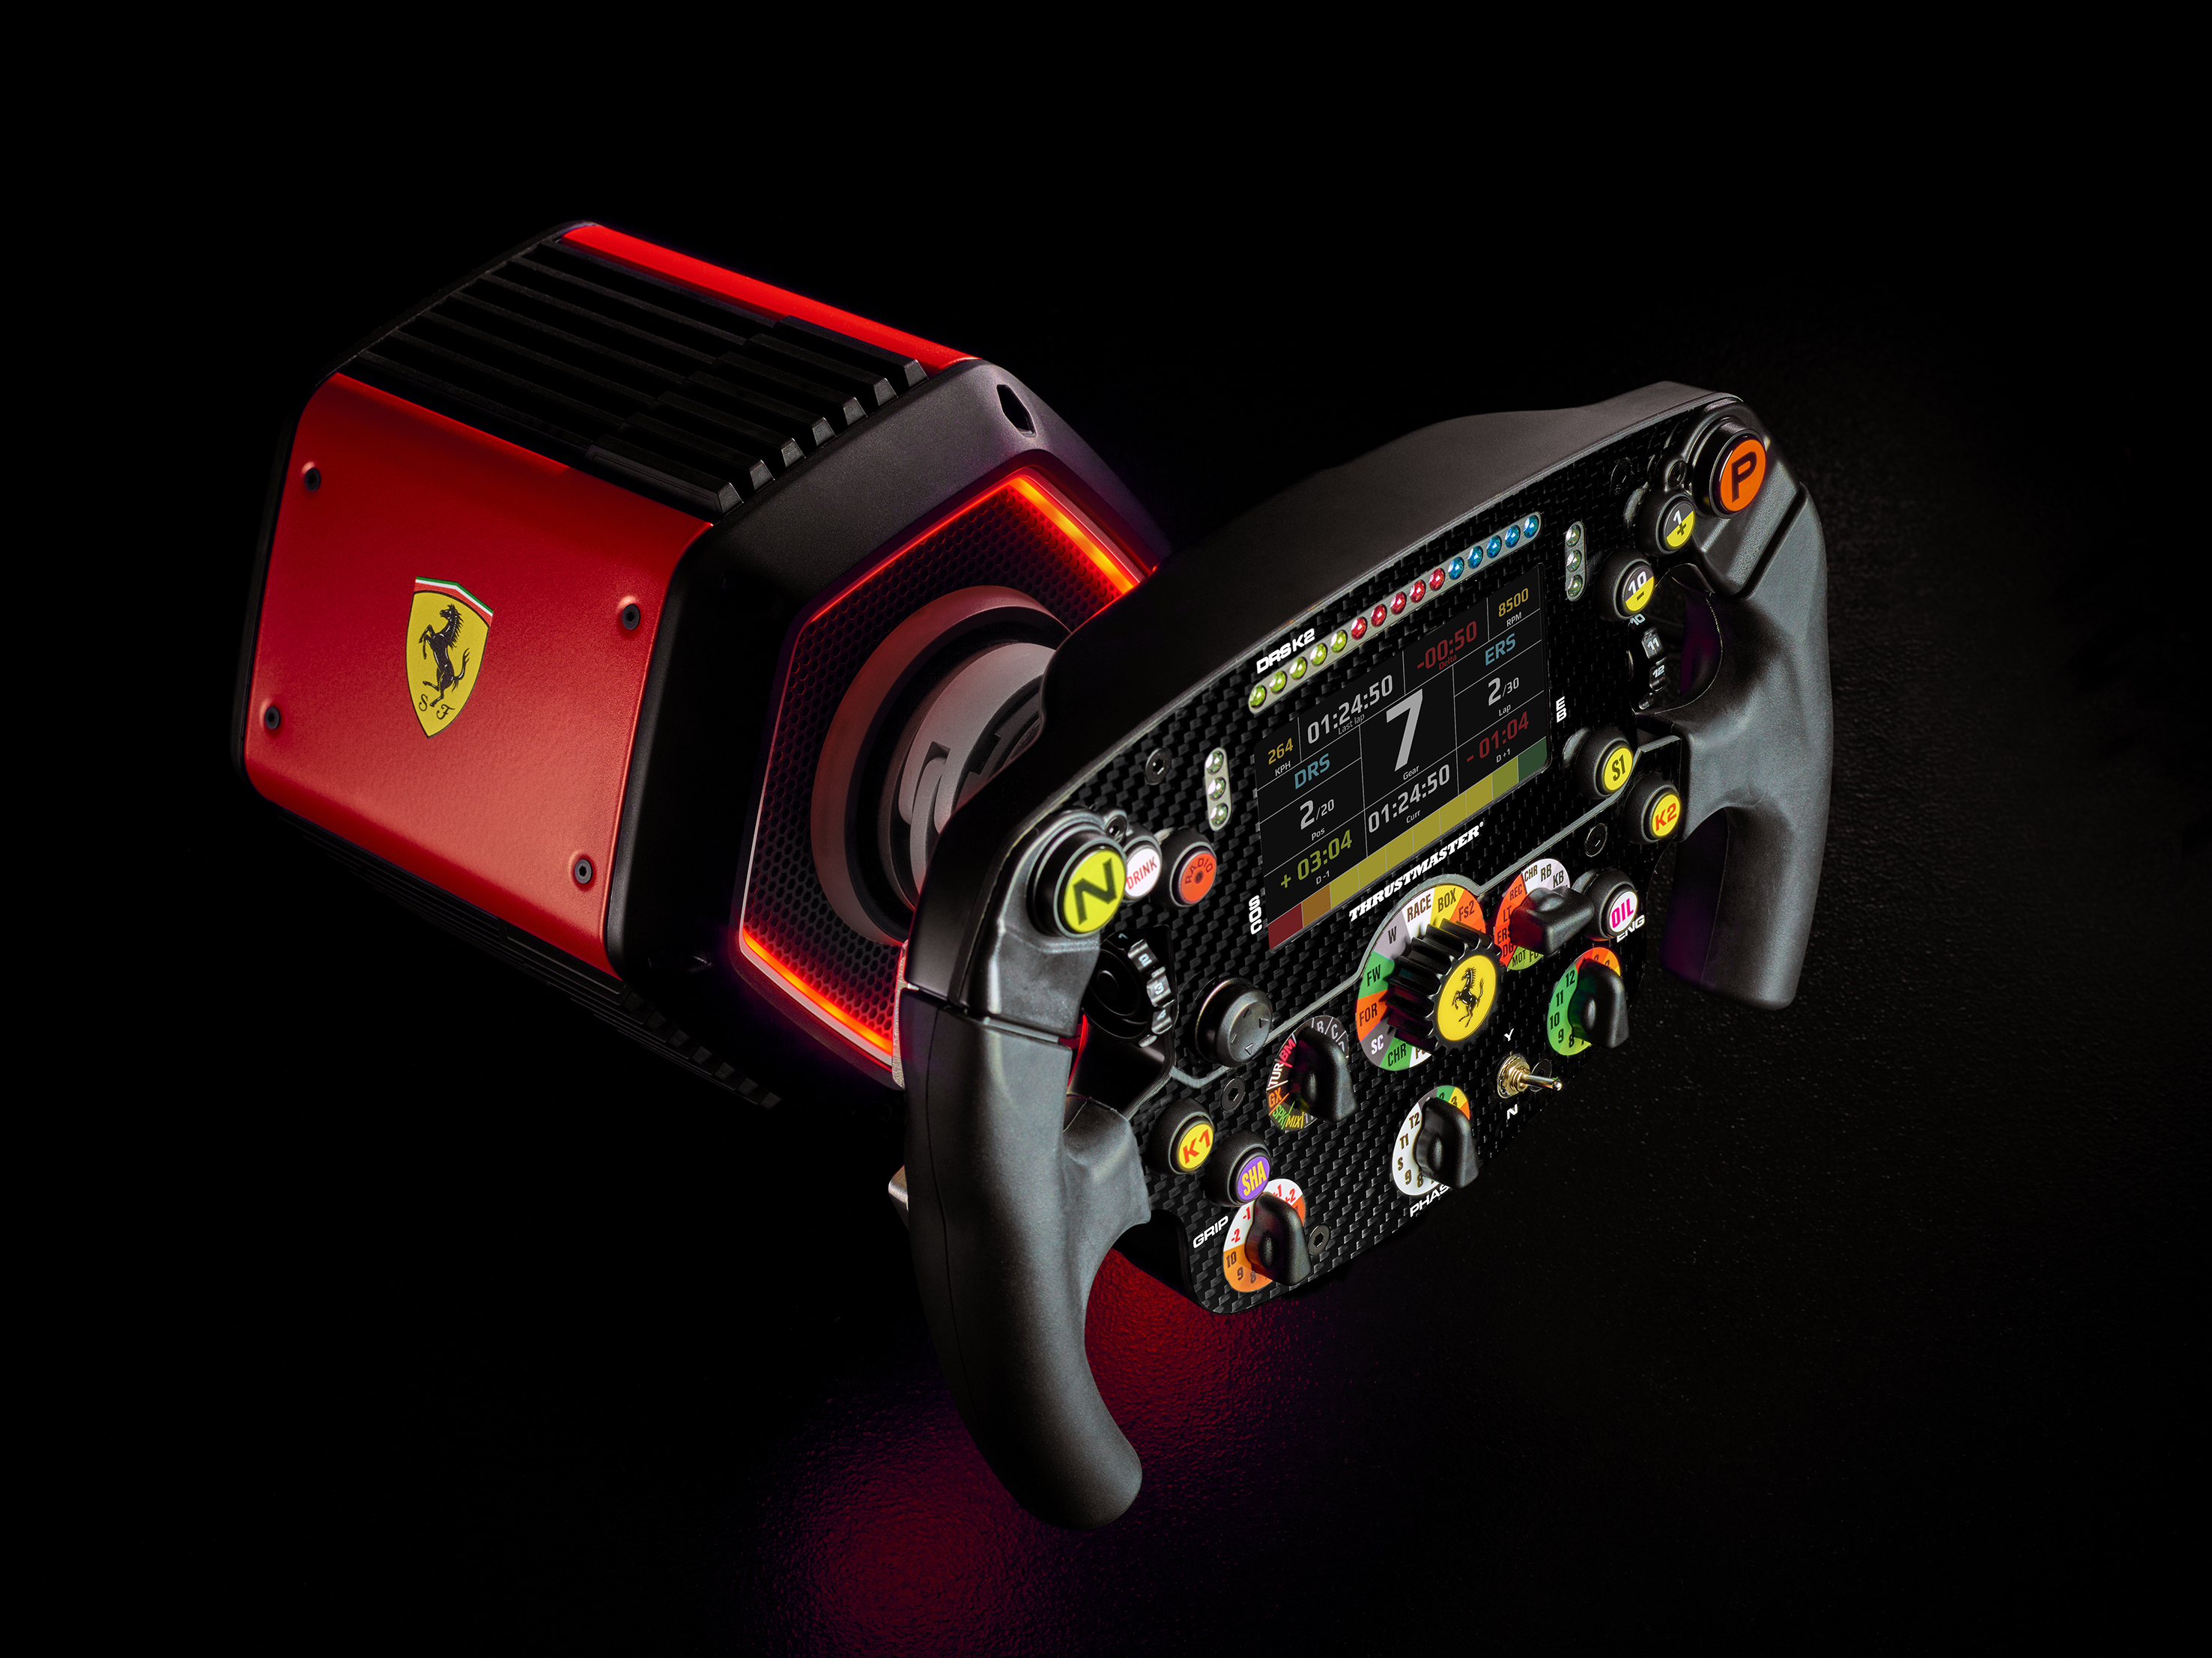 Thrustmaster Official on X: From its base to its wheel, the T818 Ferrari  SF1000 Simulator is the peak example of Thrustmaster and Ferrari's  collaboration and their pursuit of excellence in sim racing